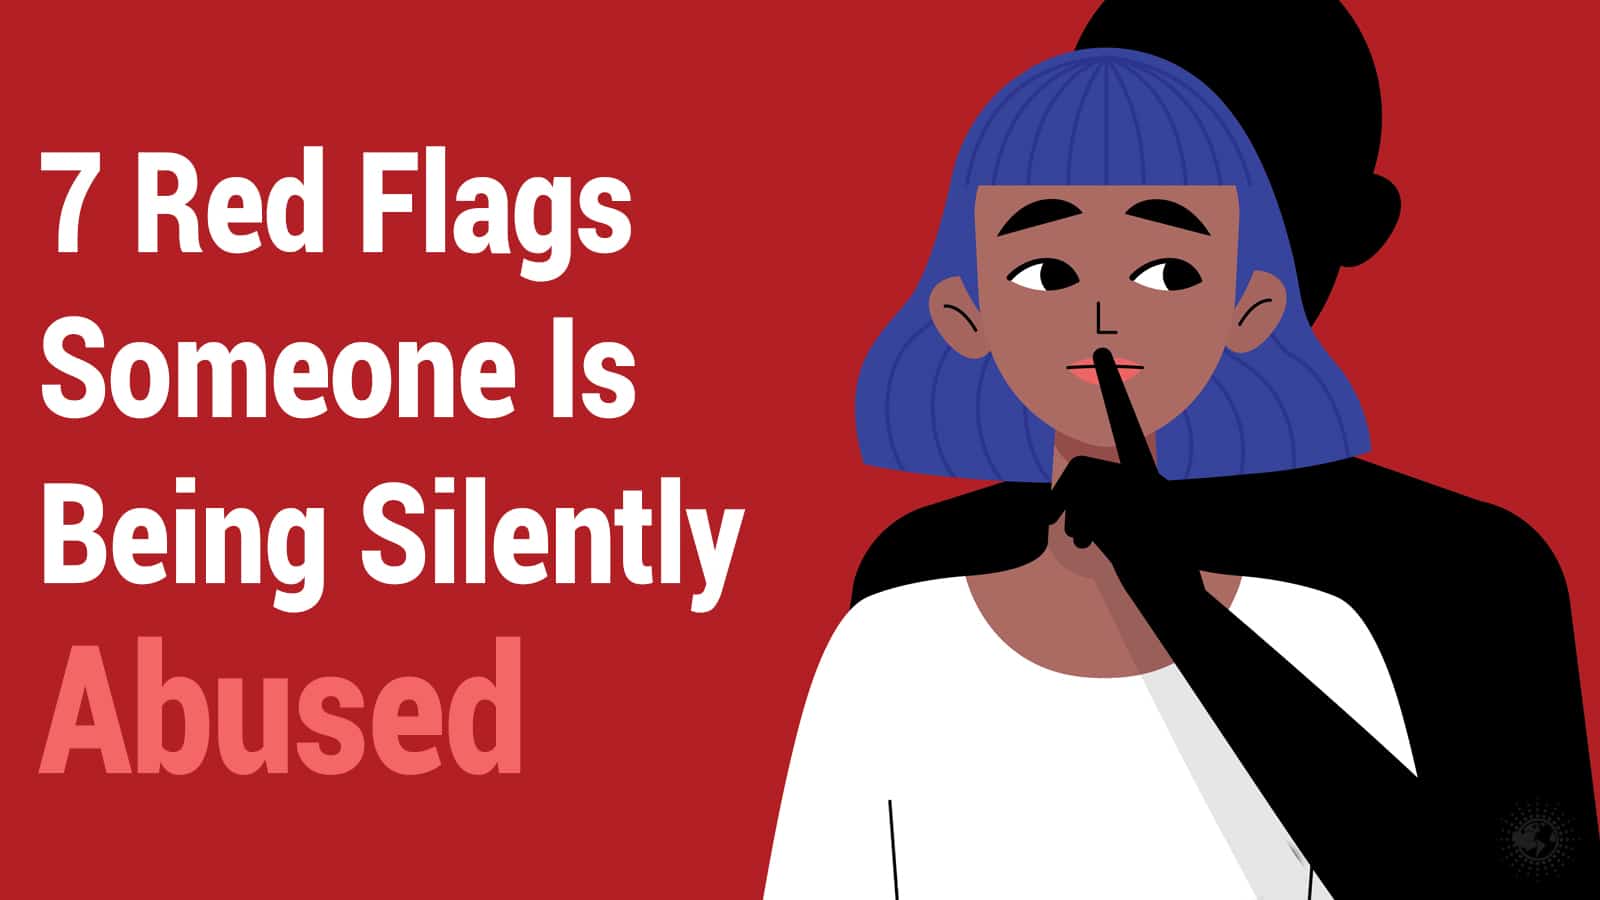 7 Red Flags Someone Is Being Silently Abused